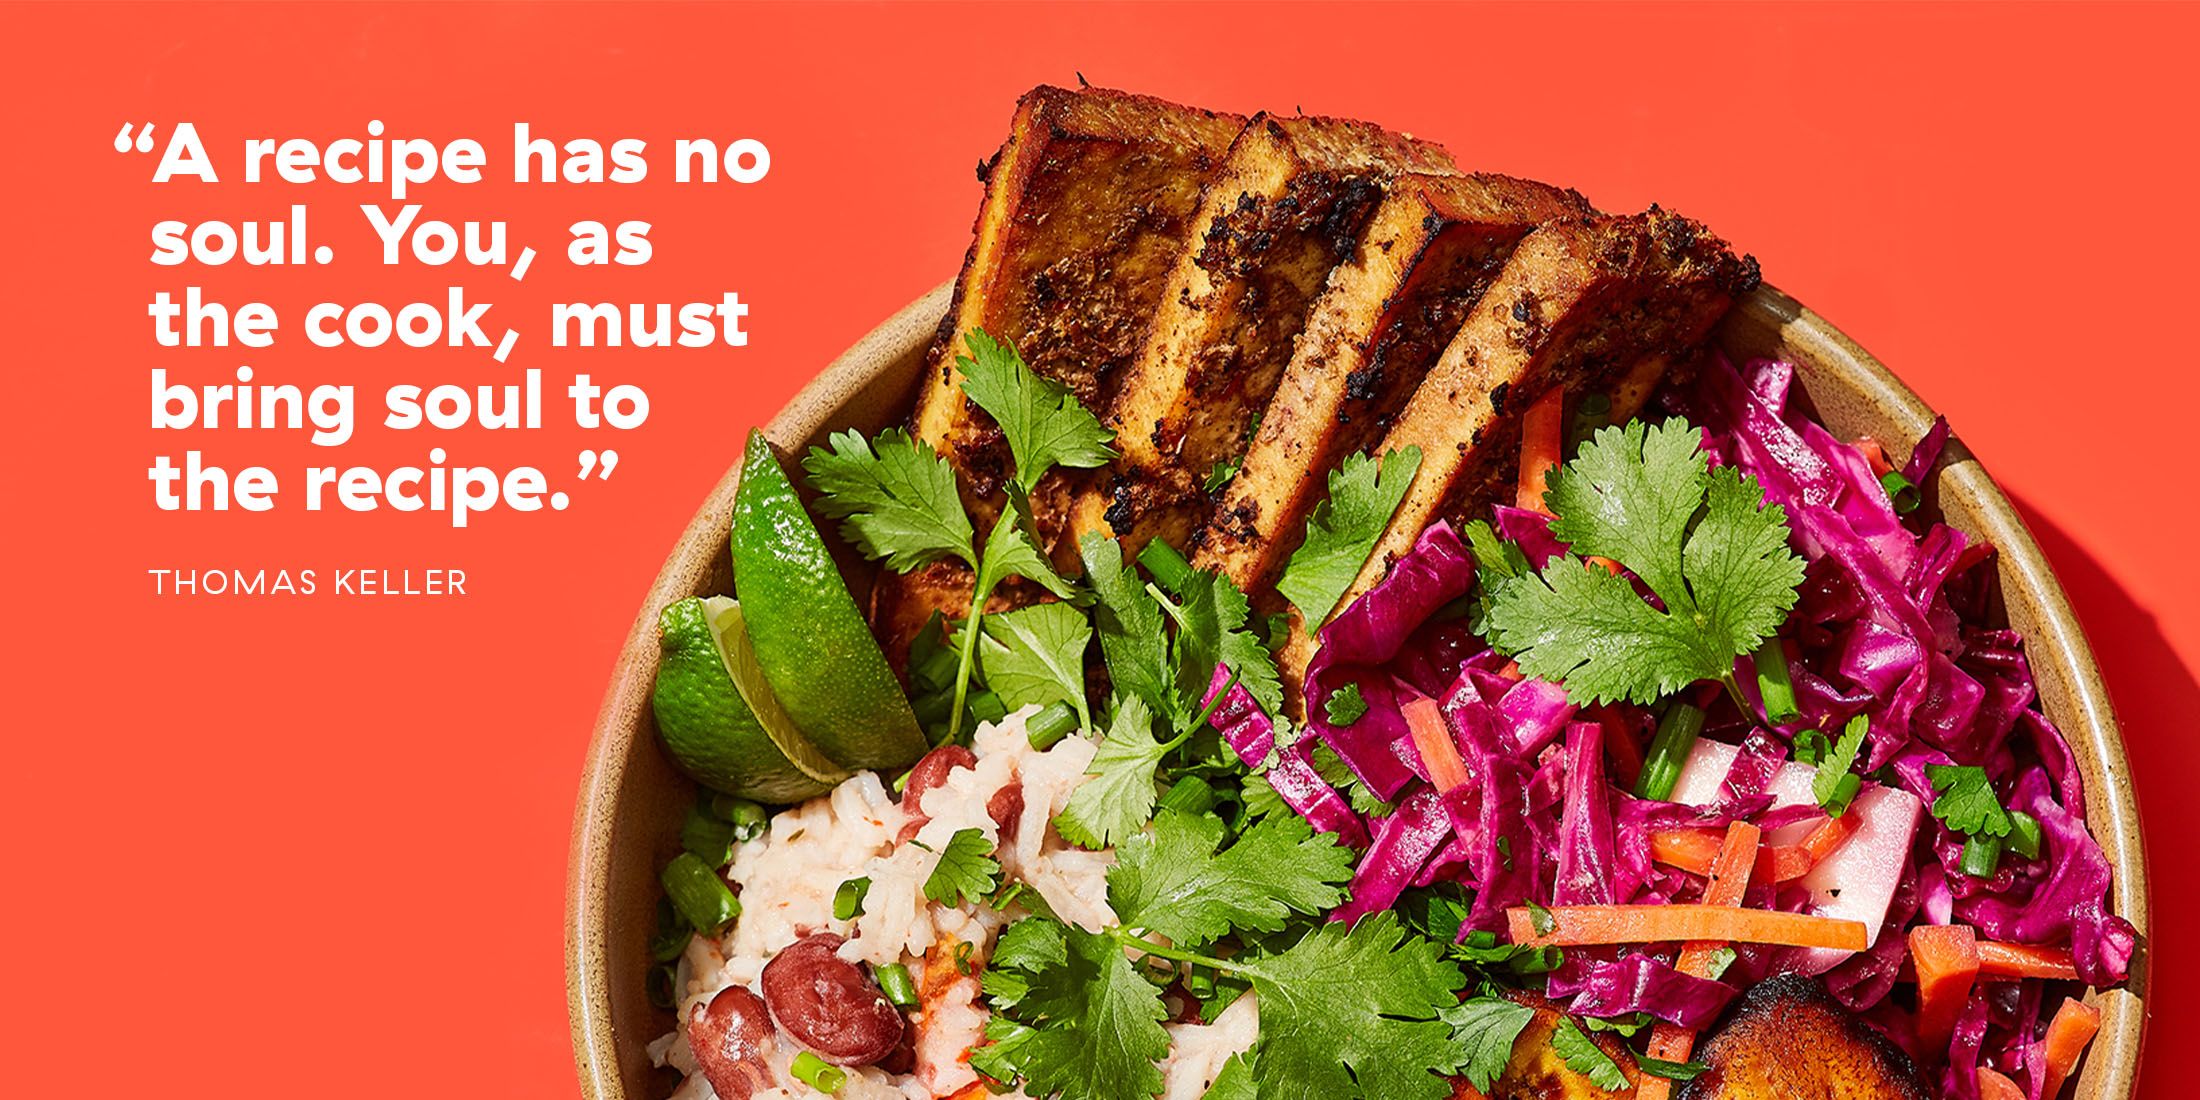 24 Best Food Quotes From Famous Chefs And Celebrities - Great Sayings About Eating